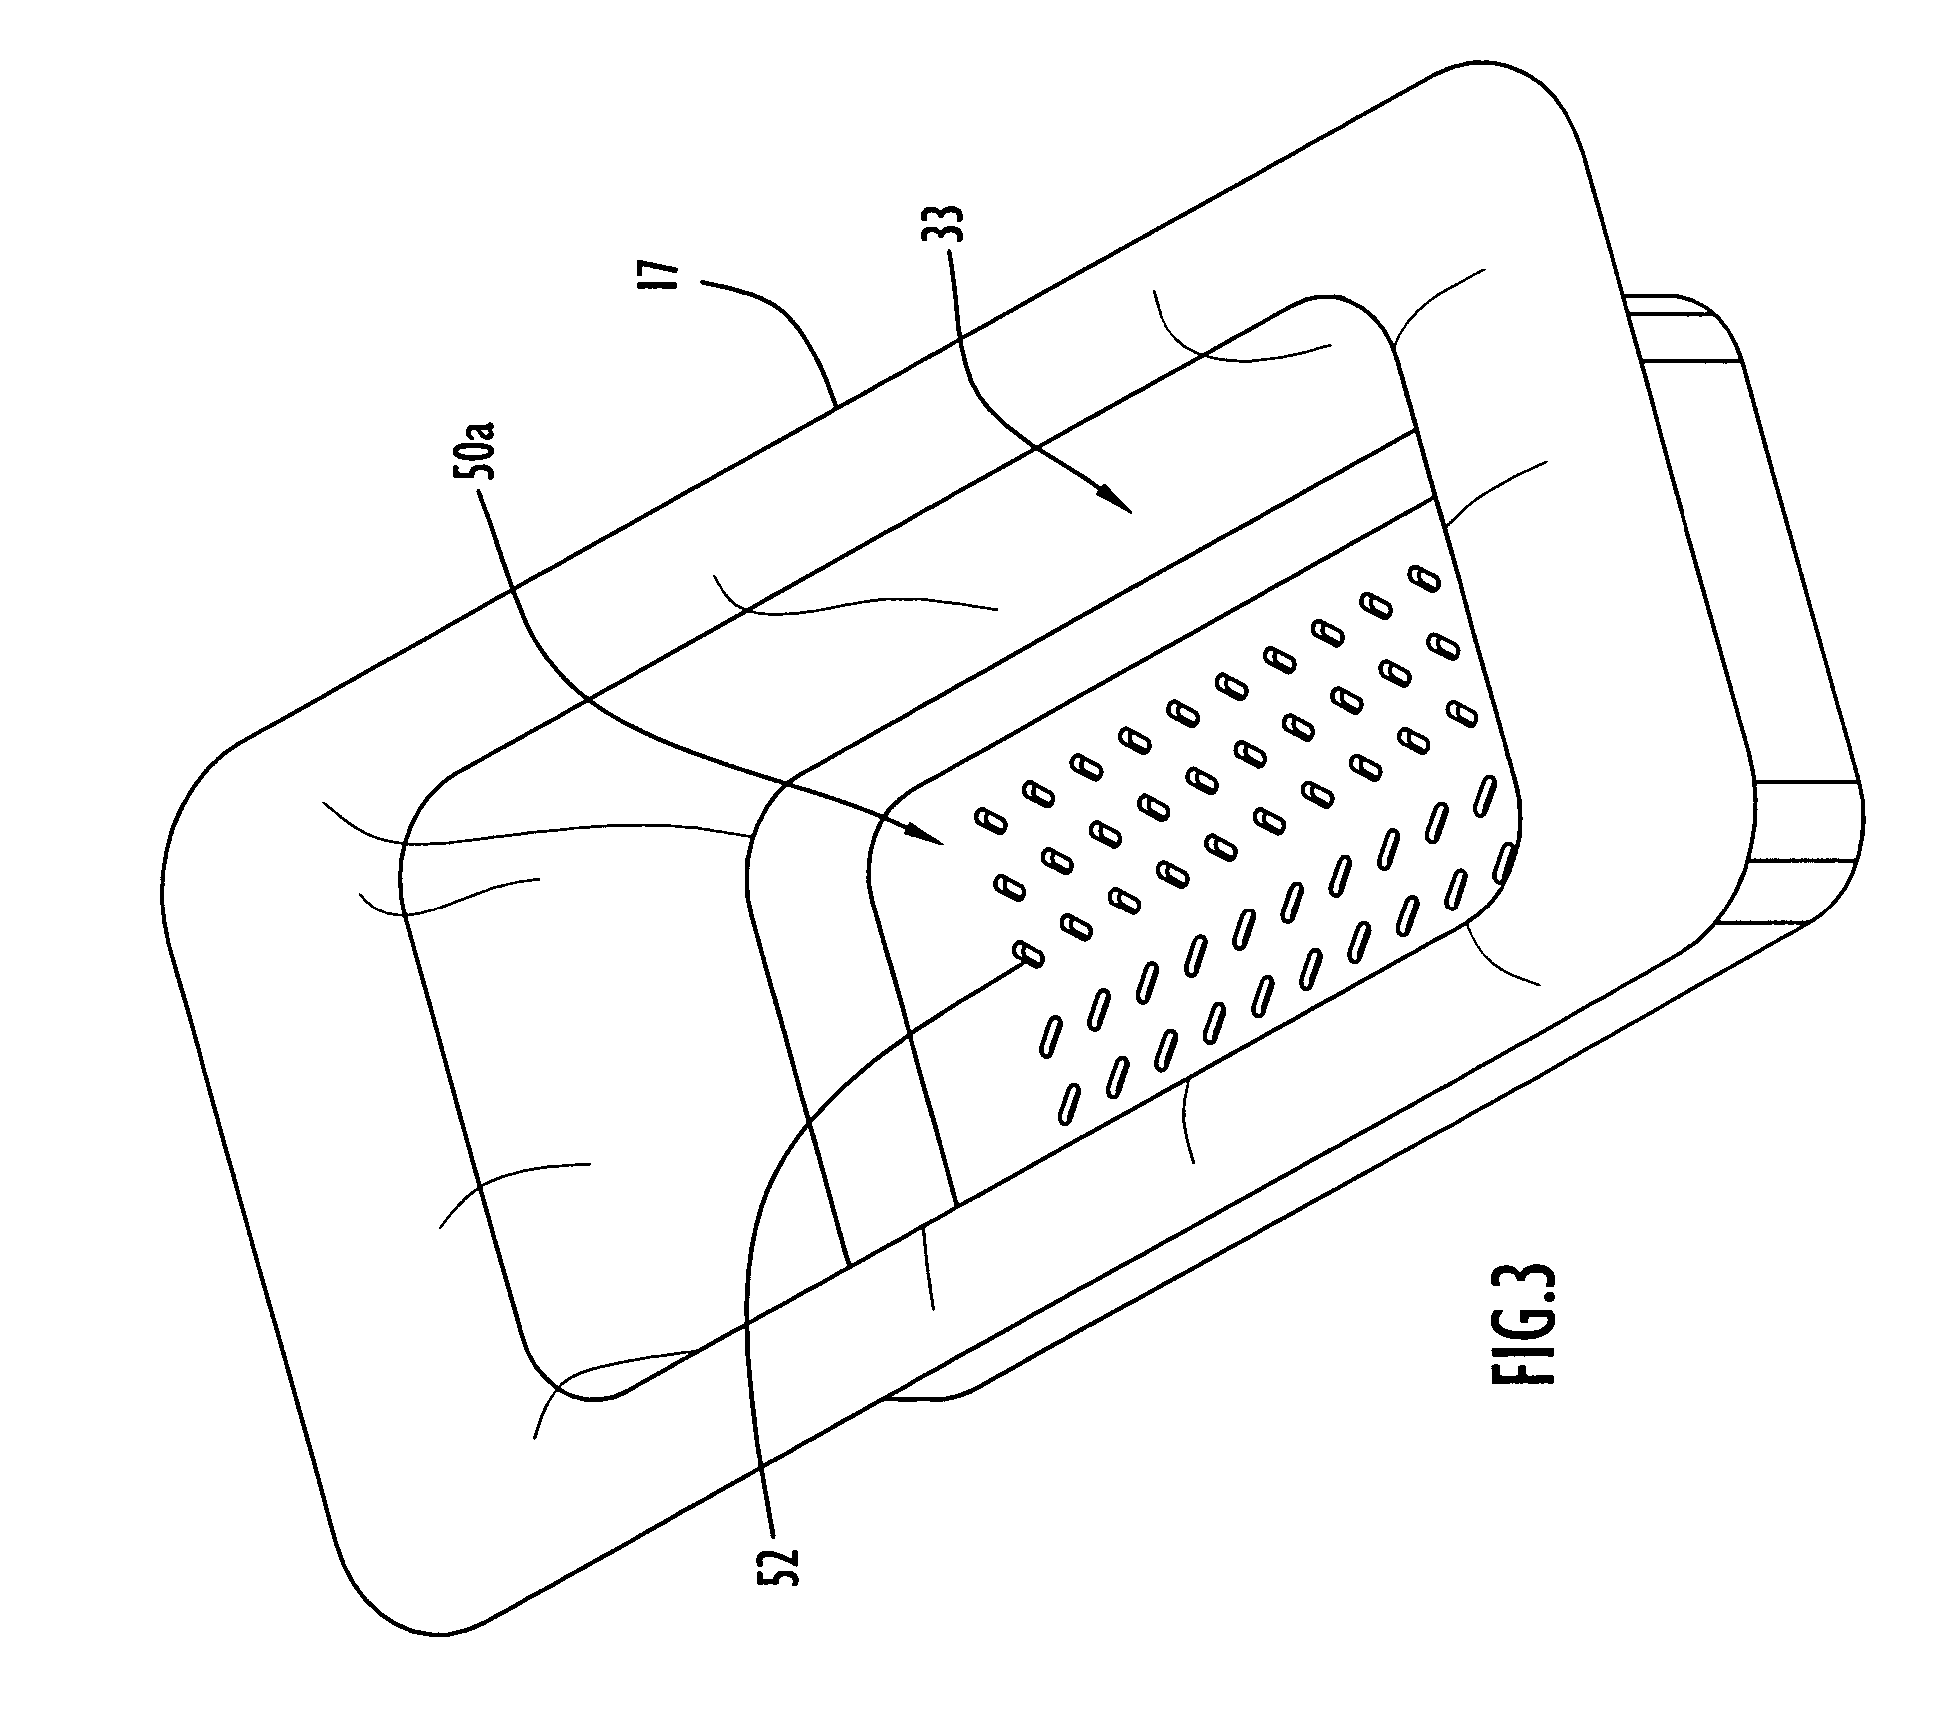 Method and apparatus for protecting sterile drapes in surgical thermal treatment systems